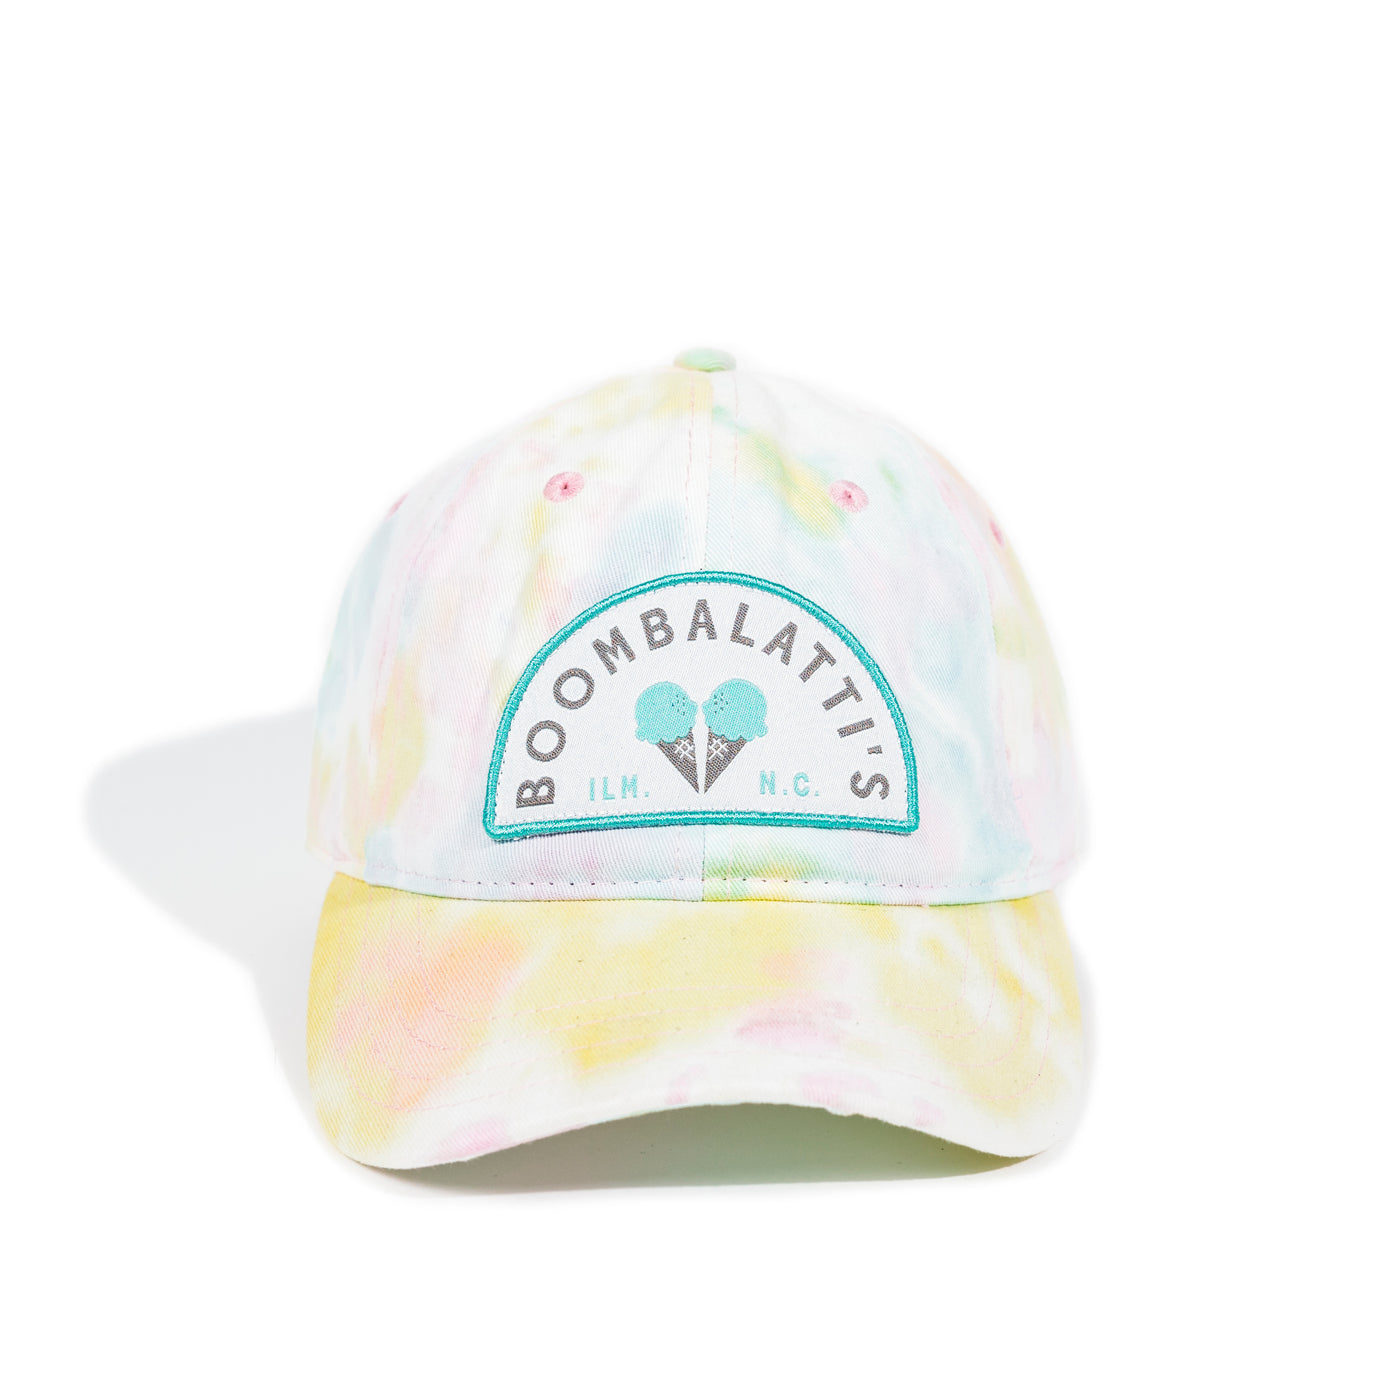 Cotton Candy Tie Dye Caps - Adult & Youth Sizes